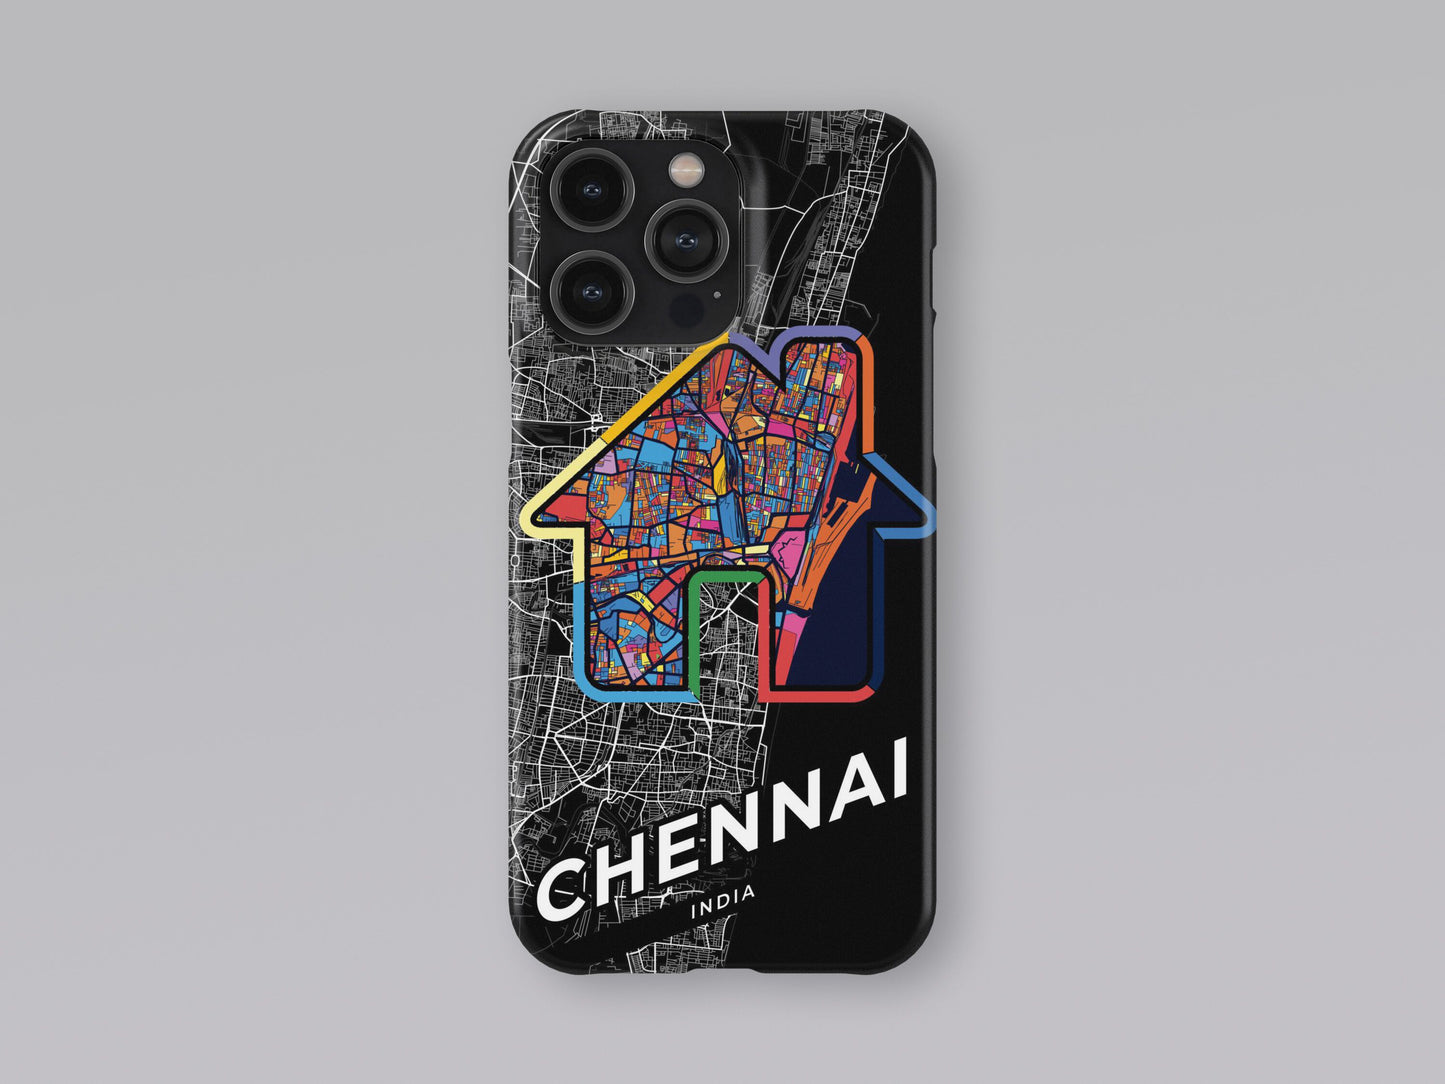 Chennai India slim phone case with colorful icon. Birthday, wedding or housewarming gift. Couple match cases. 3